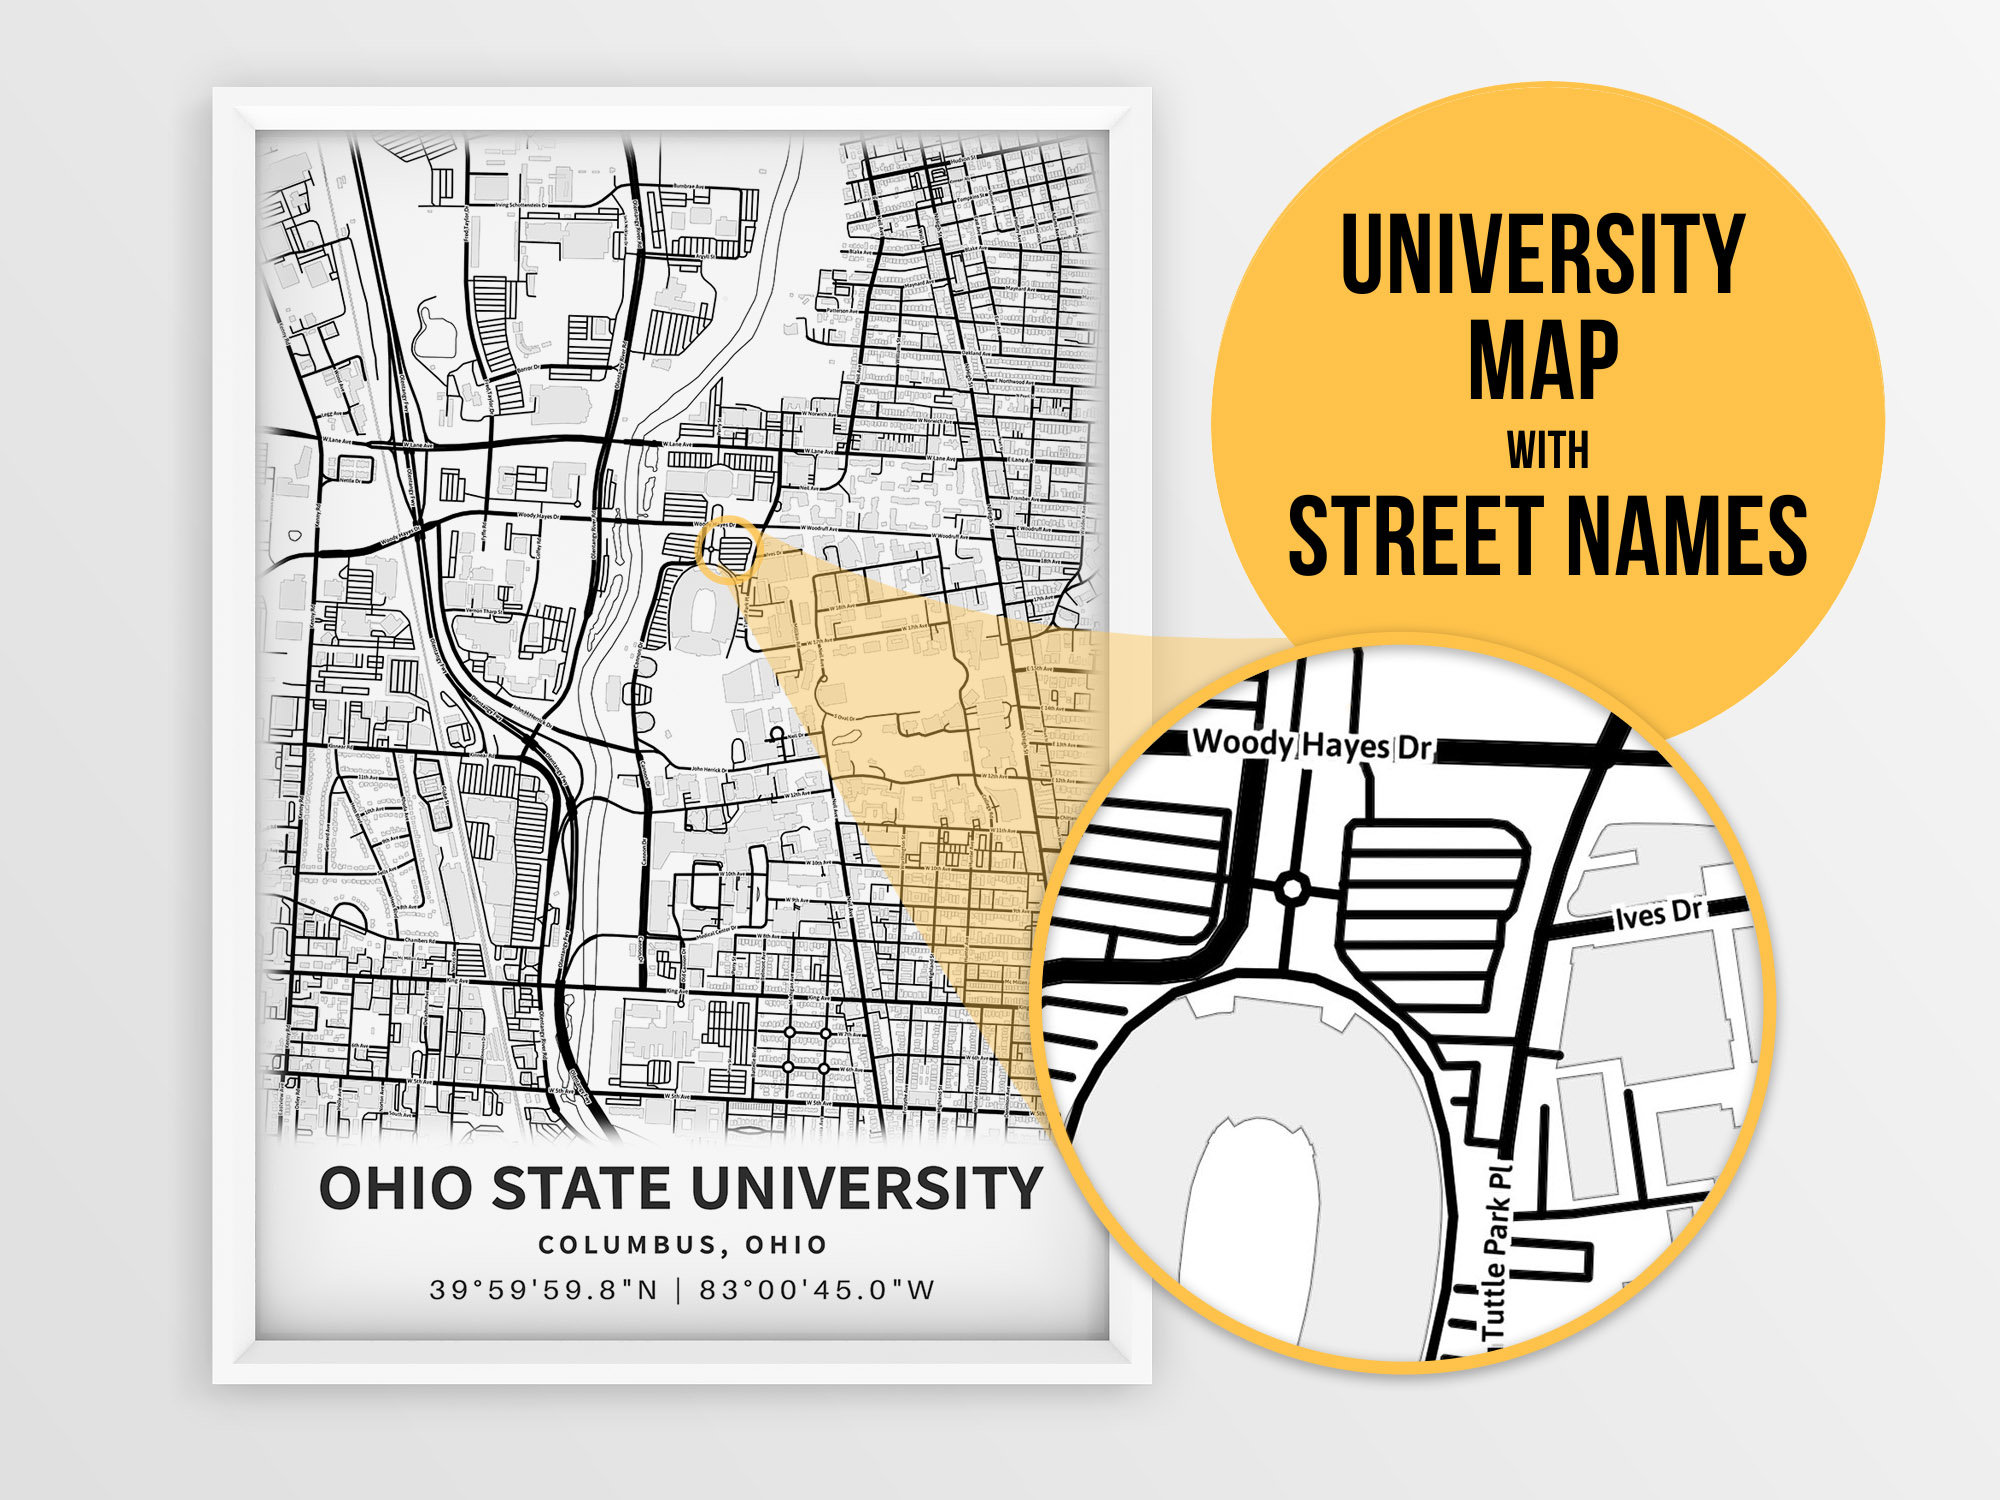 Hand Illustrated The Ohio State University Map